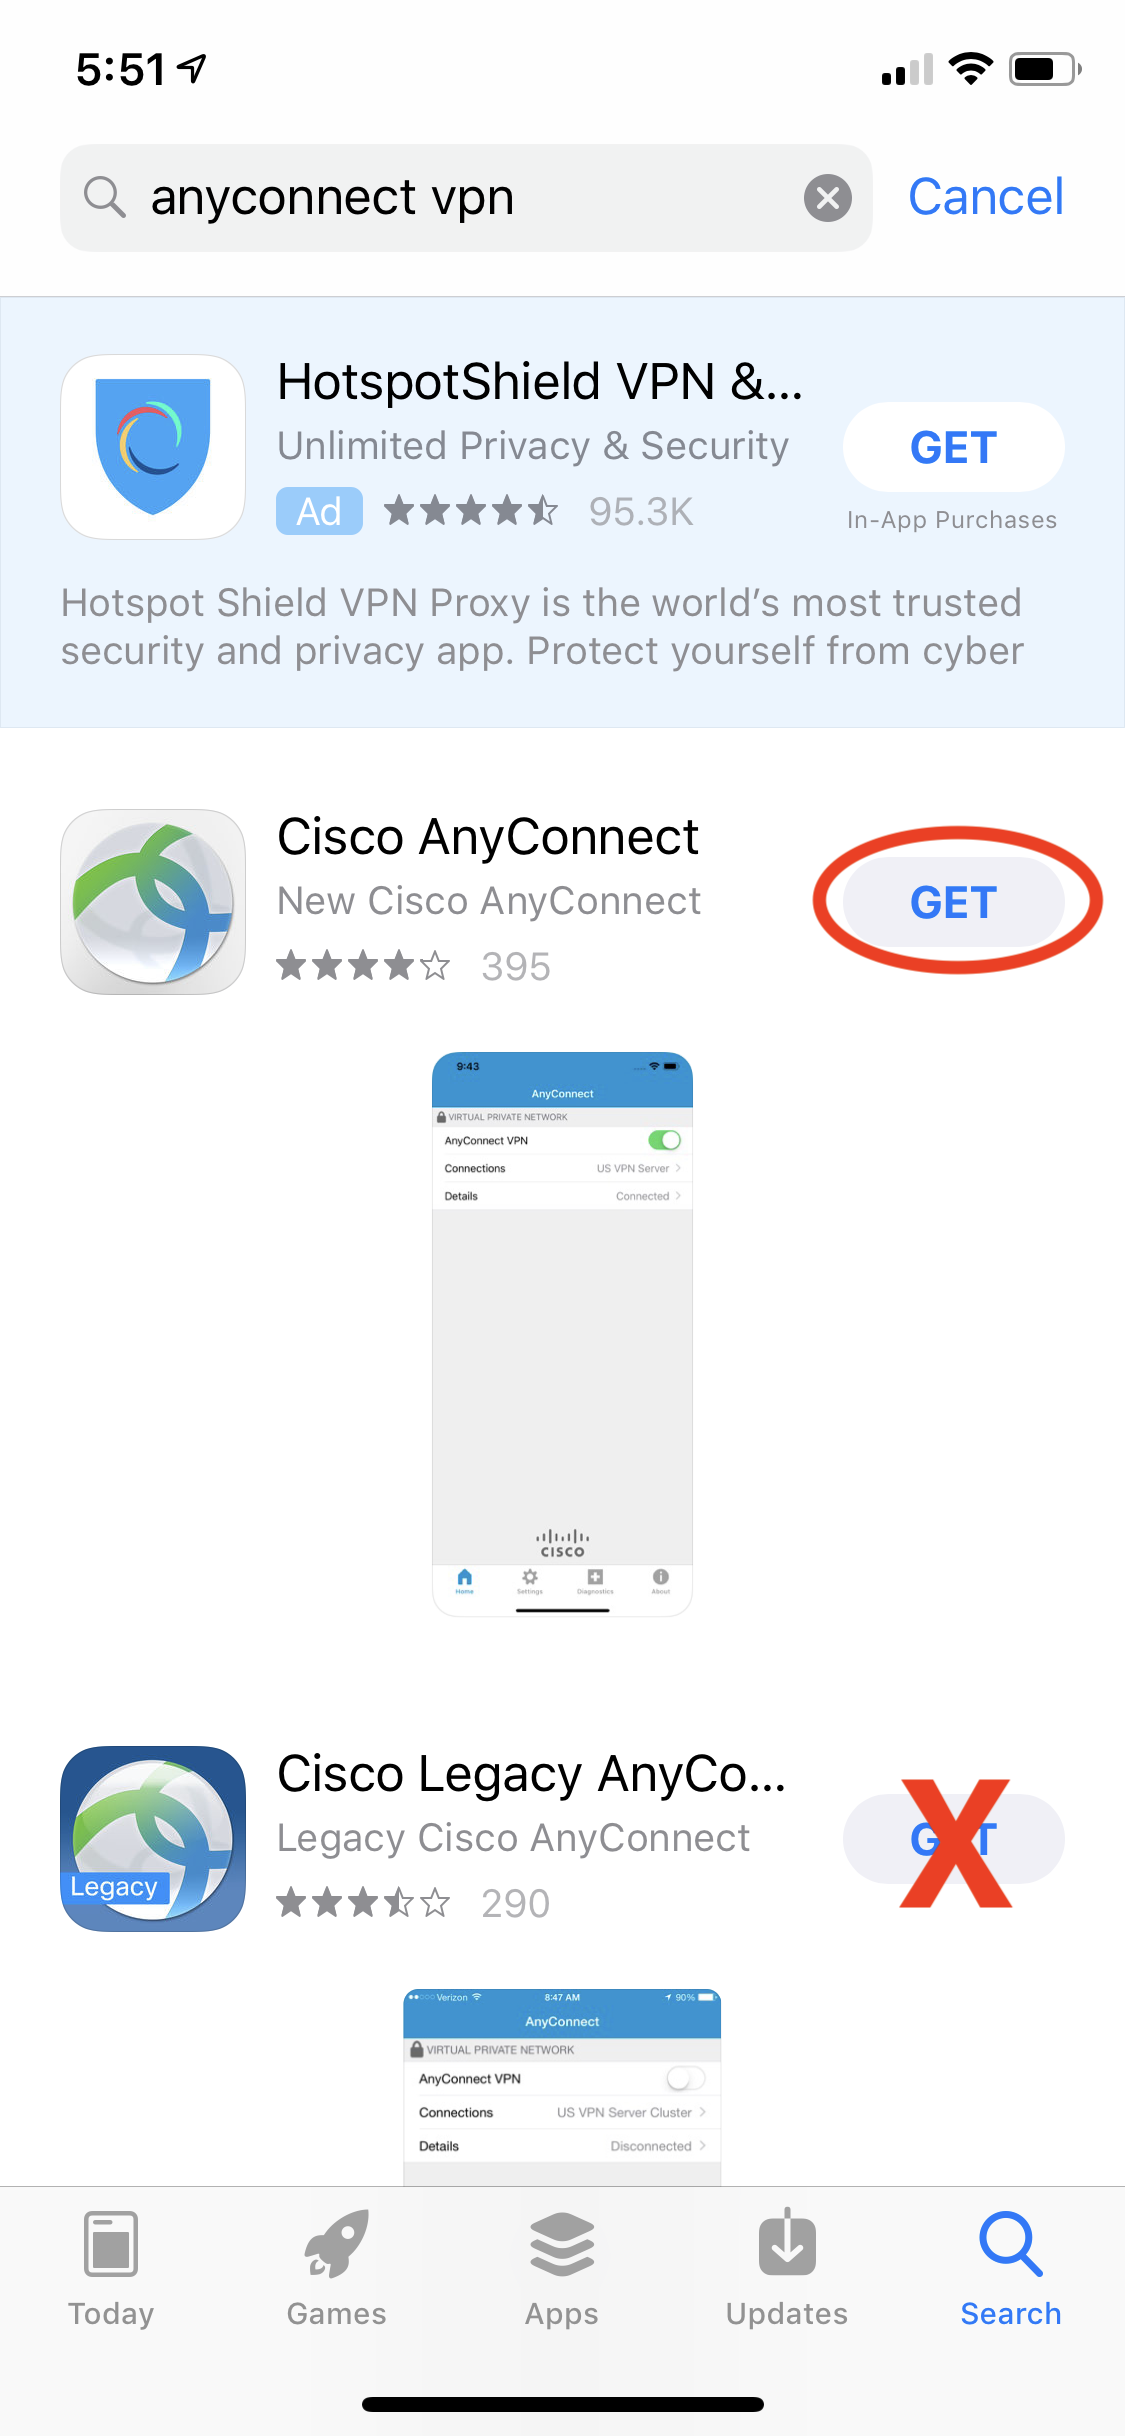 How do I use AnyConnect on my Iphone?